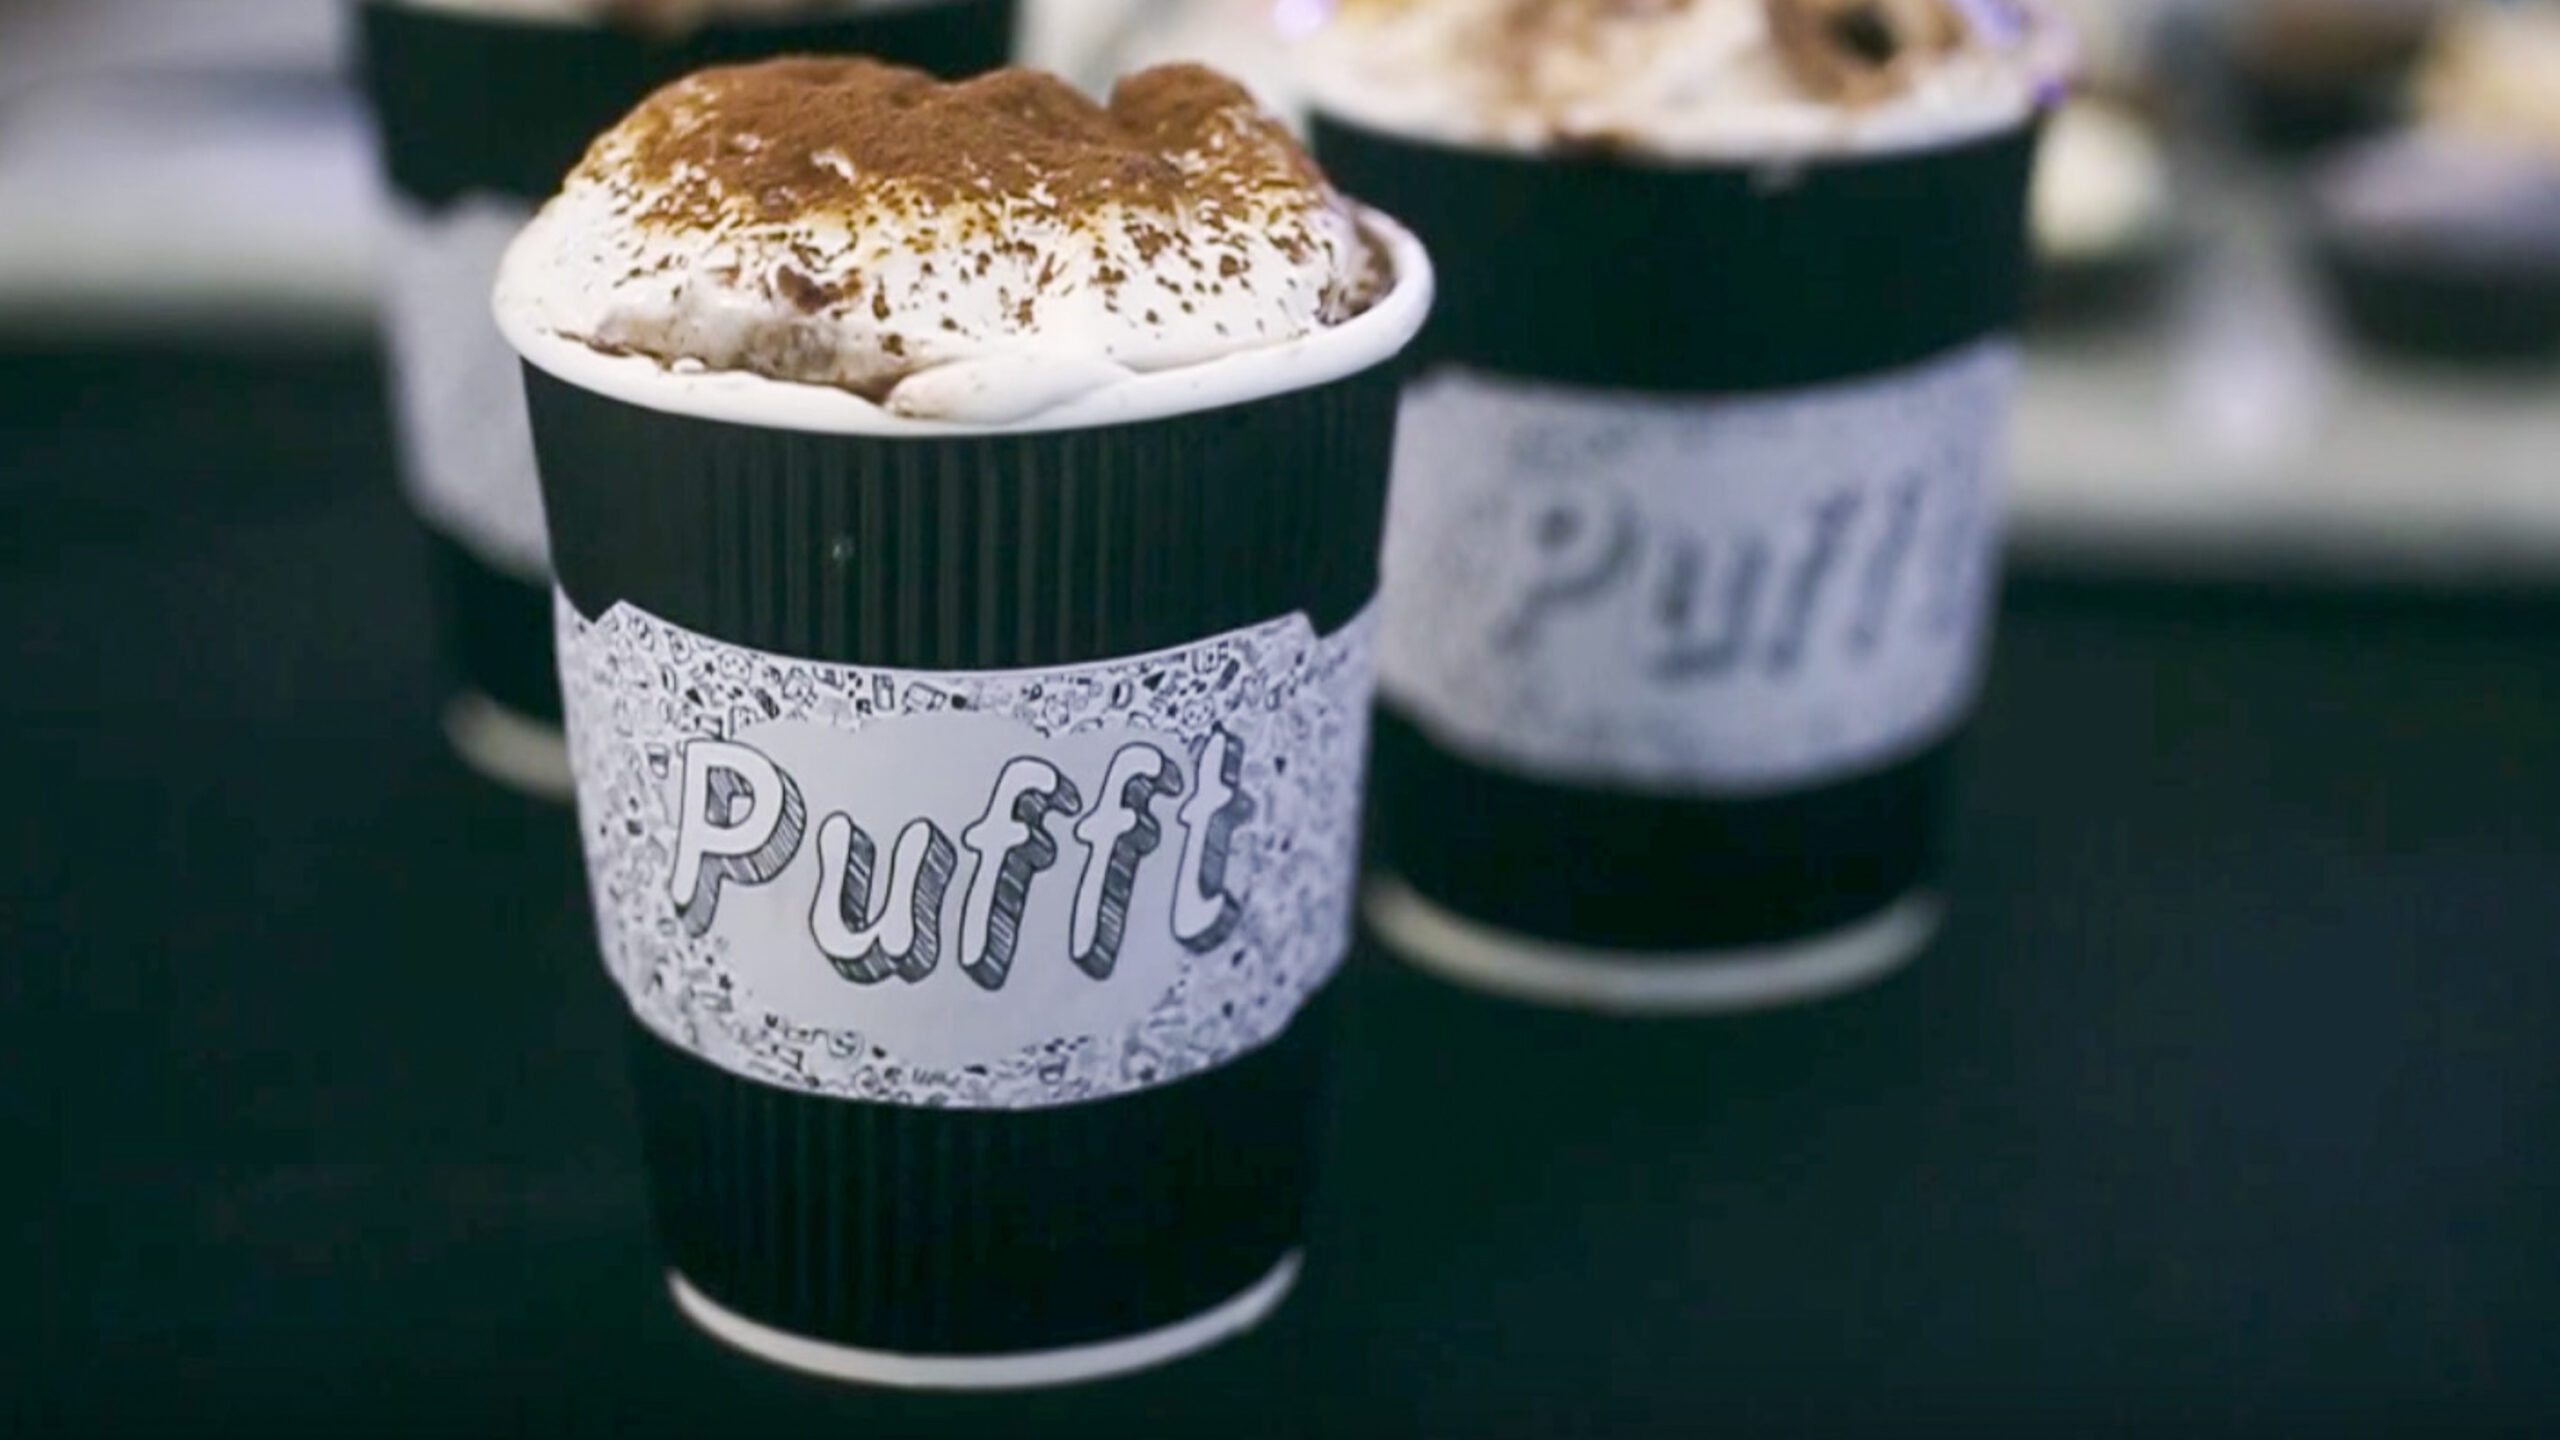 WATCH: Where to get rich, marshmallow cream-topped hot chocolate